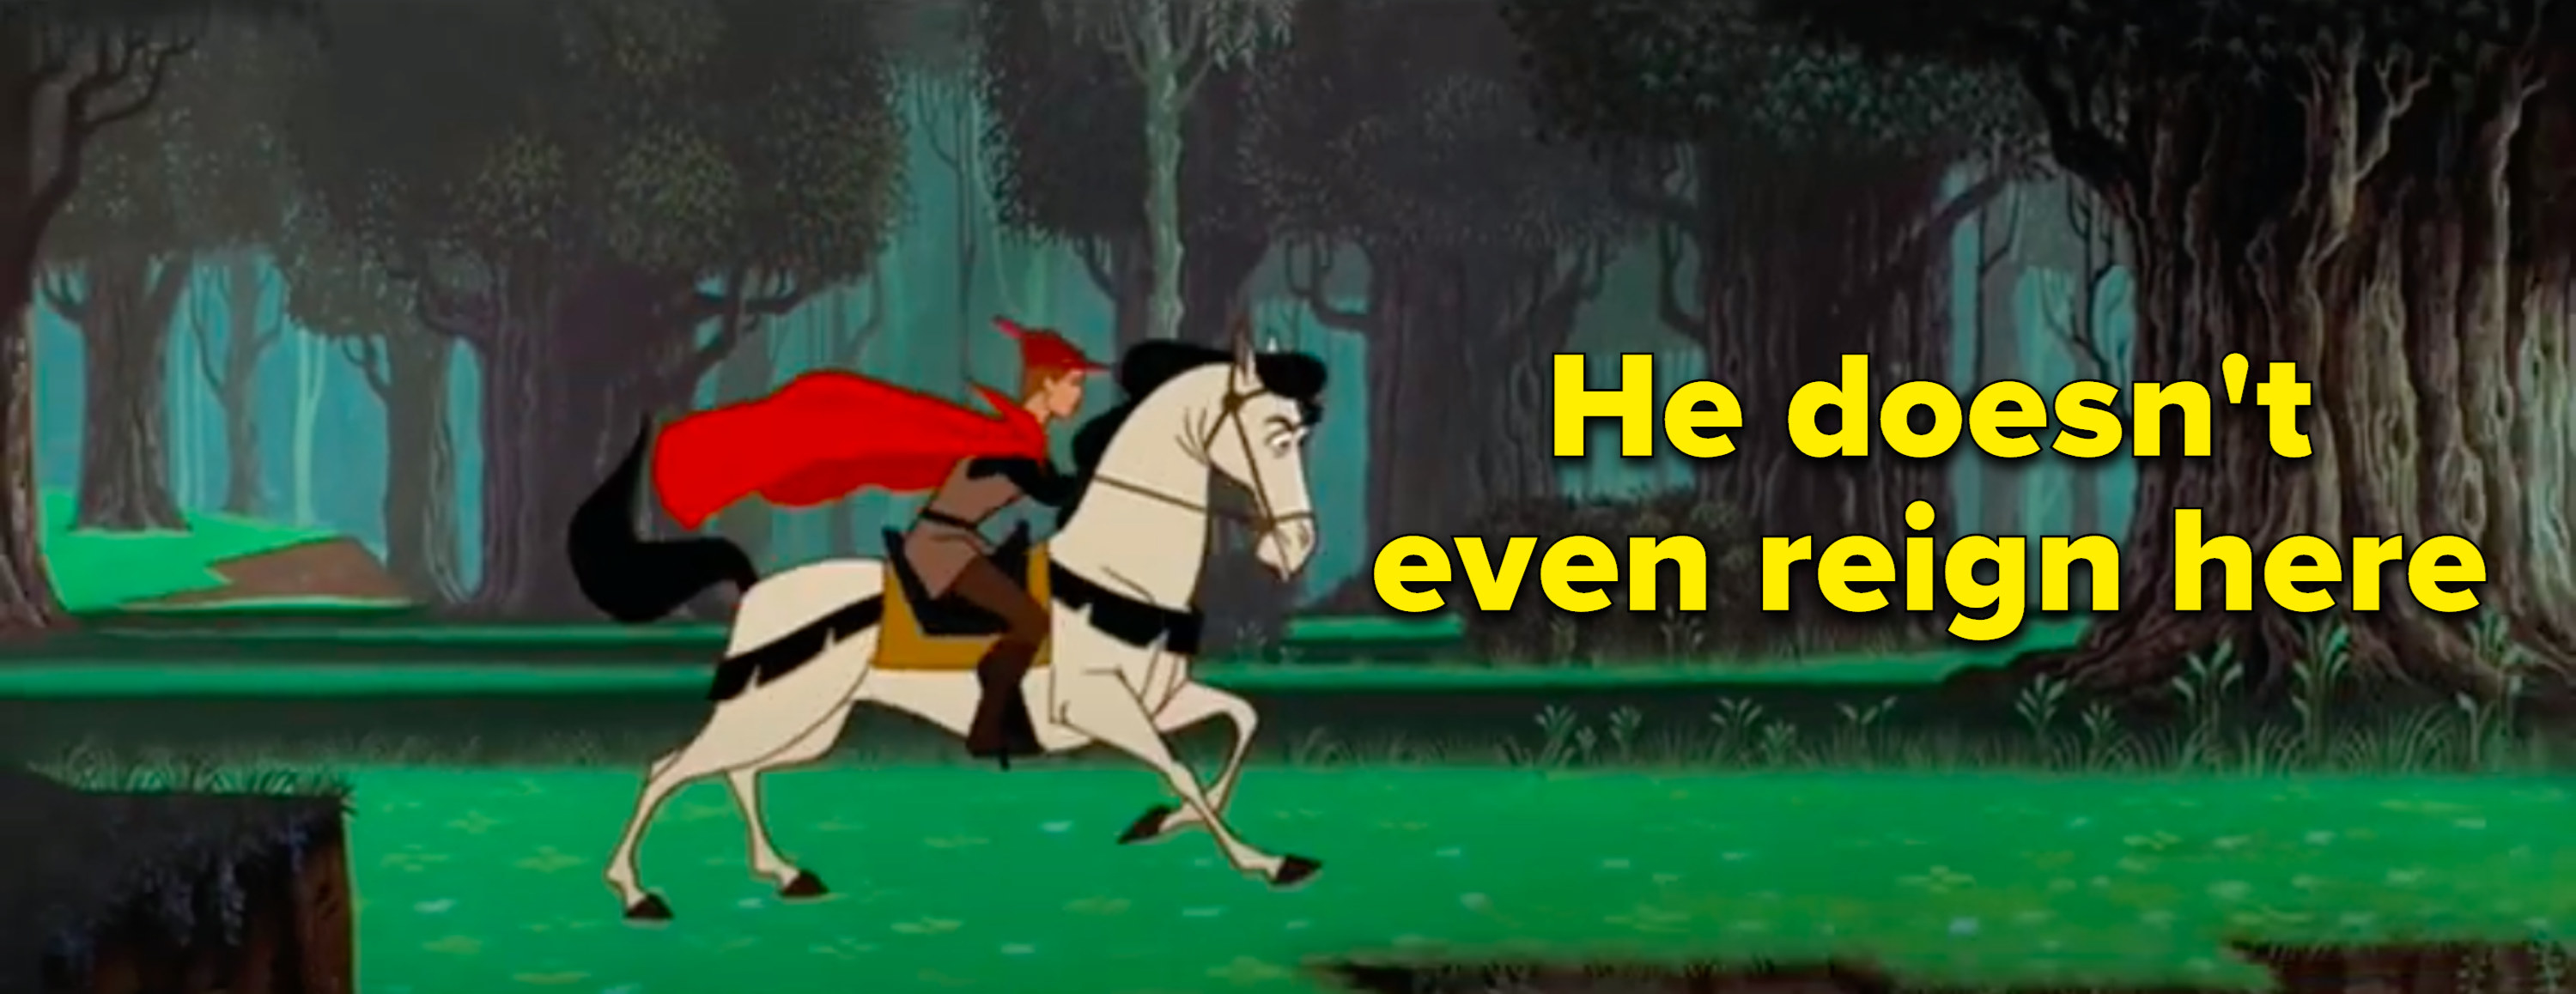 &quot;He doesn&#x27;t even reign here&quot; written next to Prince Phillip riding a horse in the forest